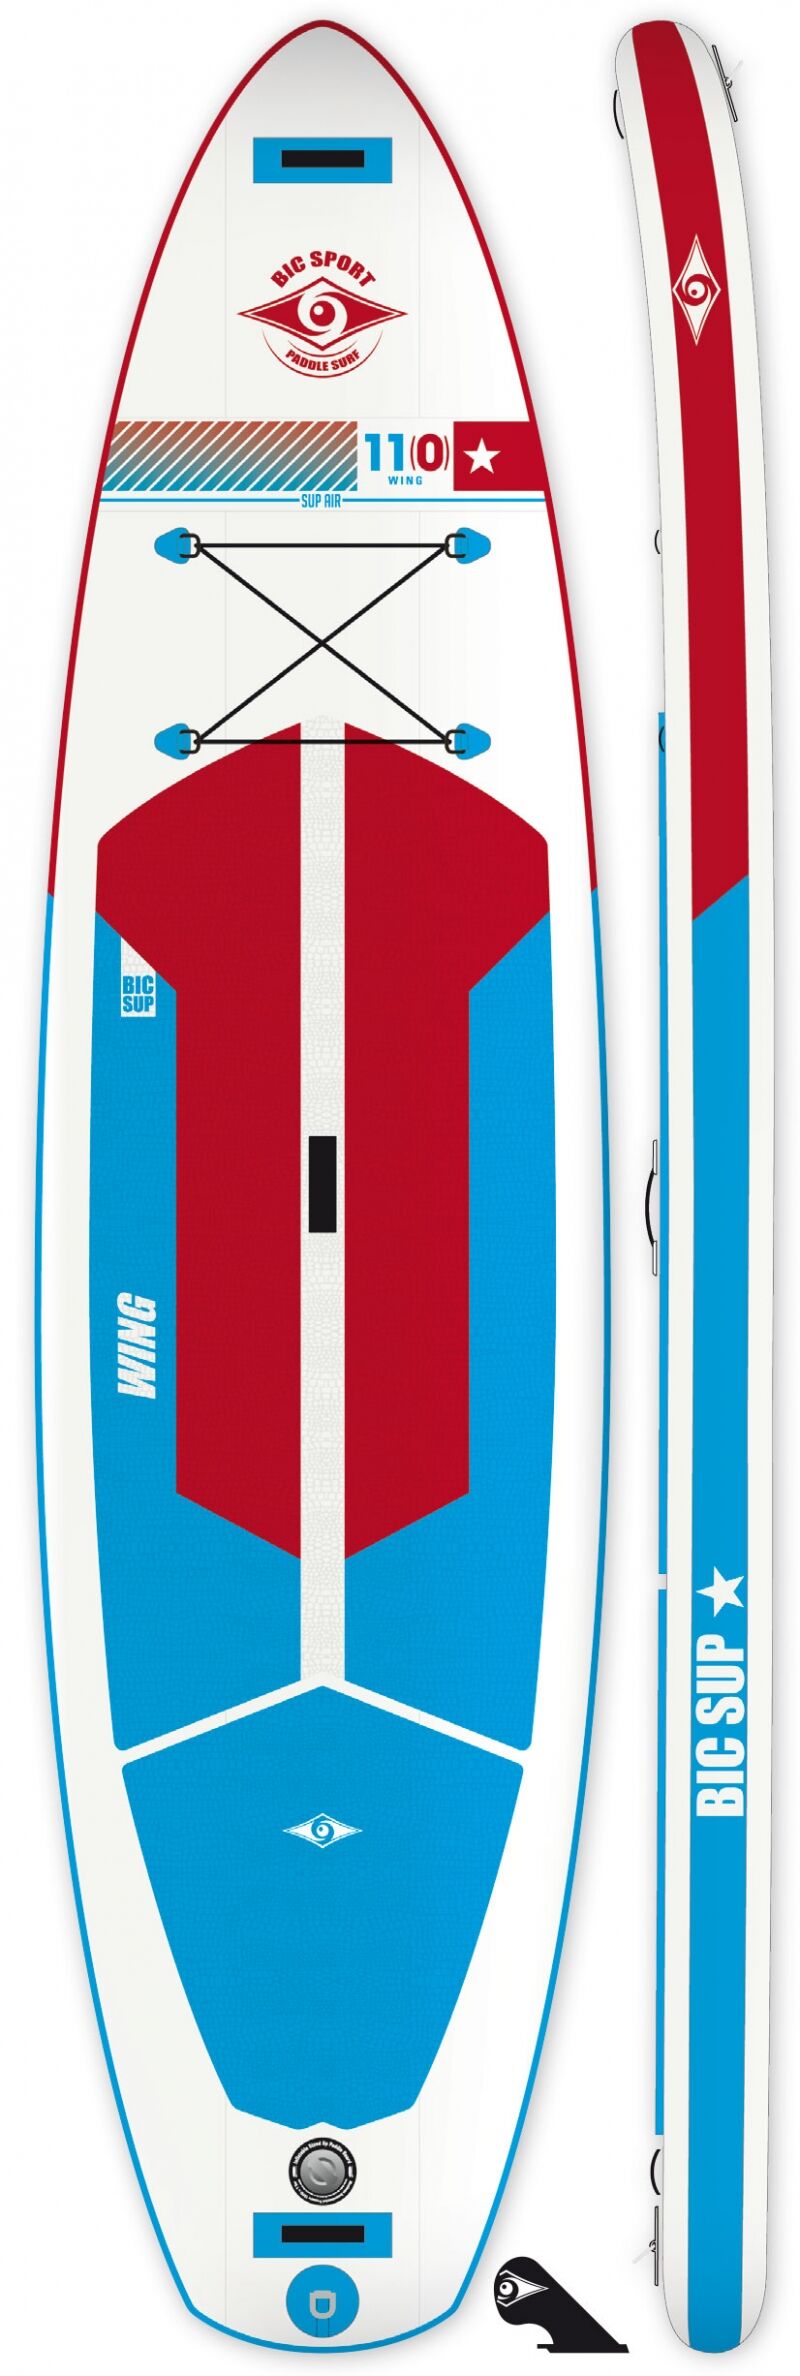 Tahe Outdoor - 11'0" Wing Air - Inflatable paddle board